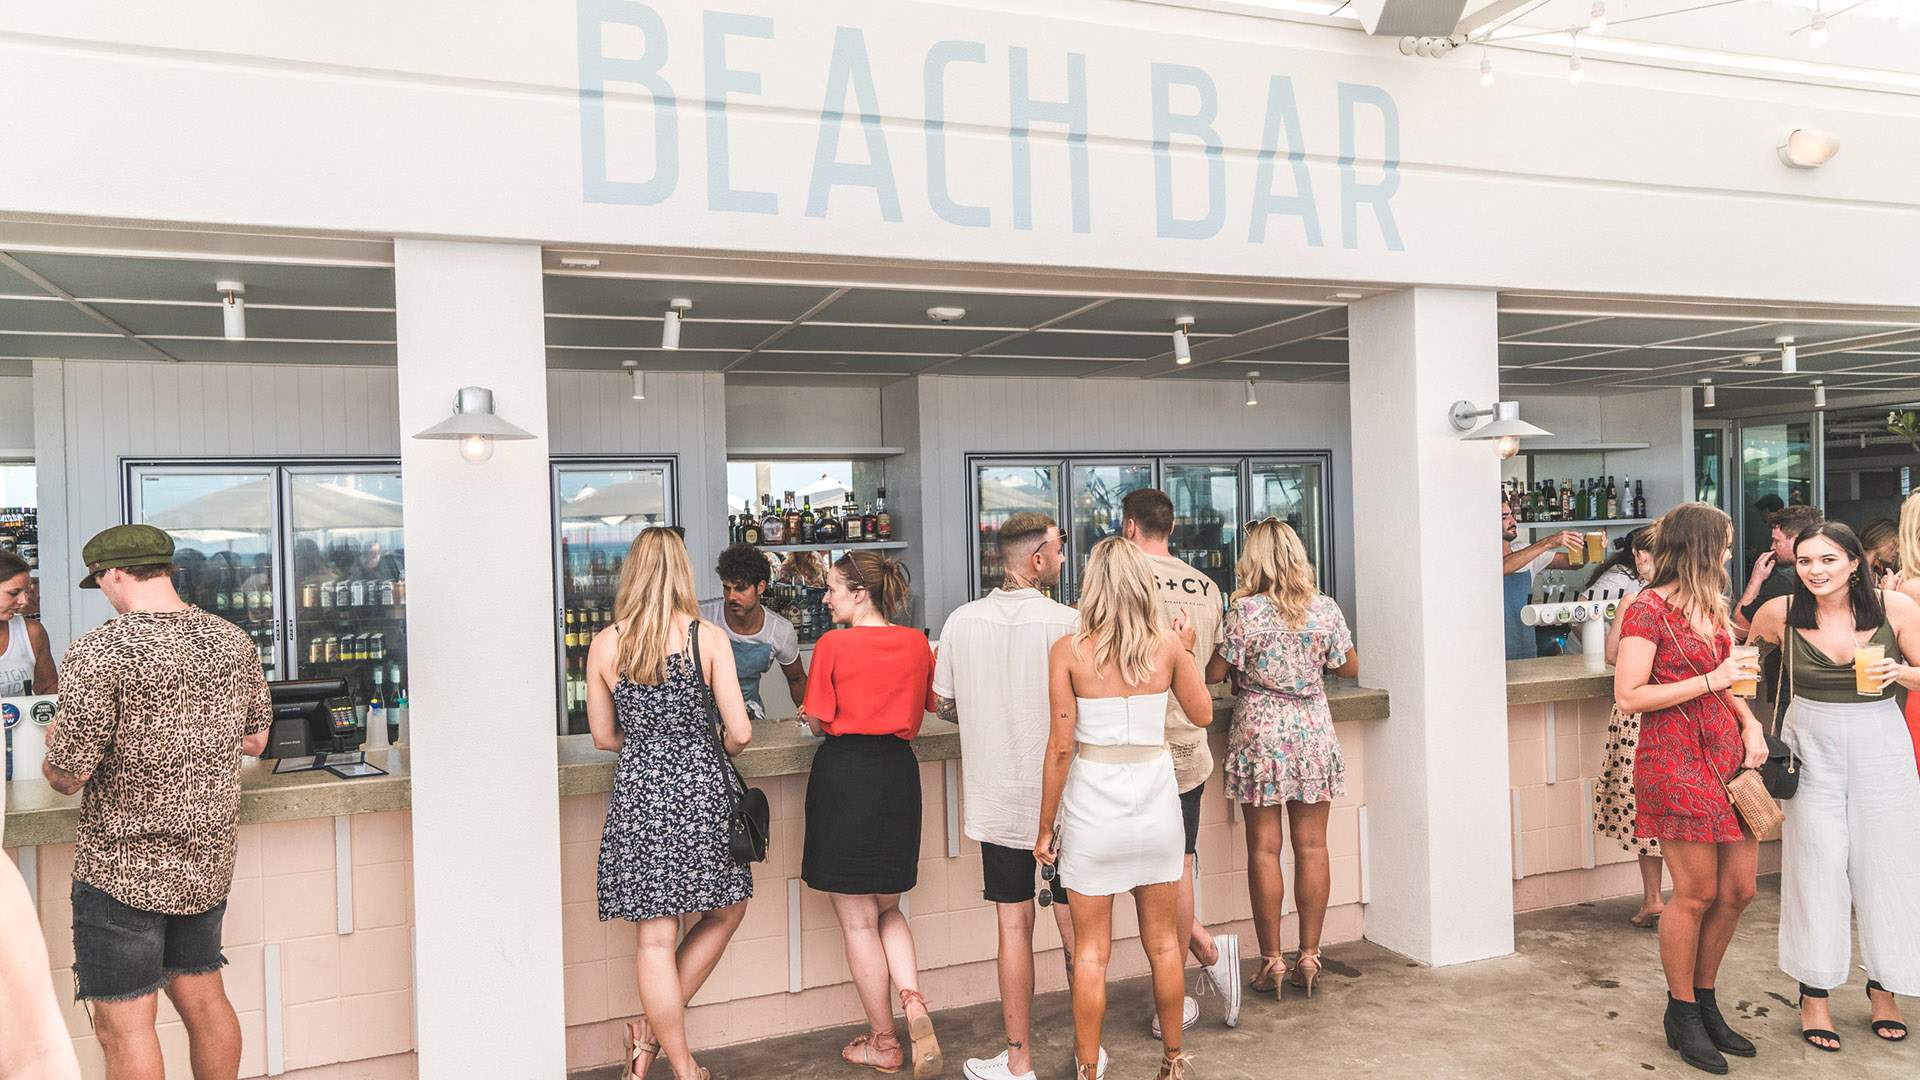 Burleigh Pavilion Is the Gold Coast's Huge New Beachfront Bar and Eatery